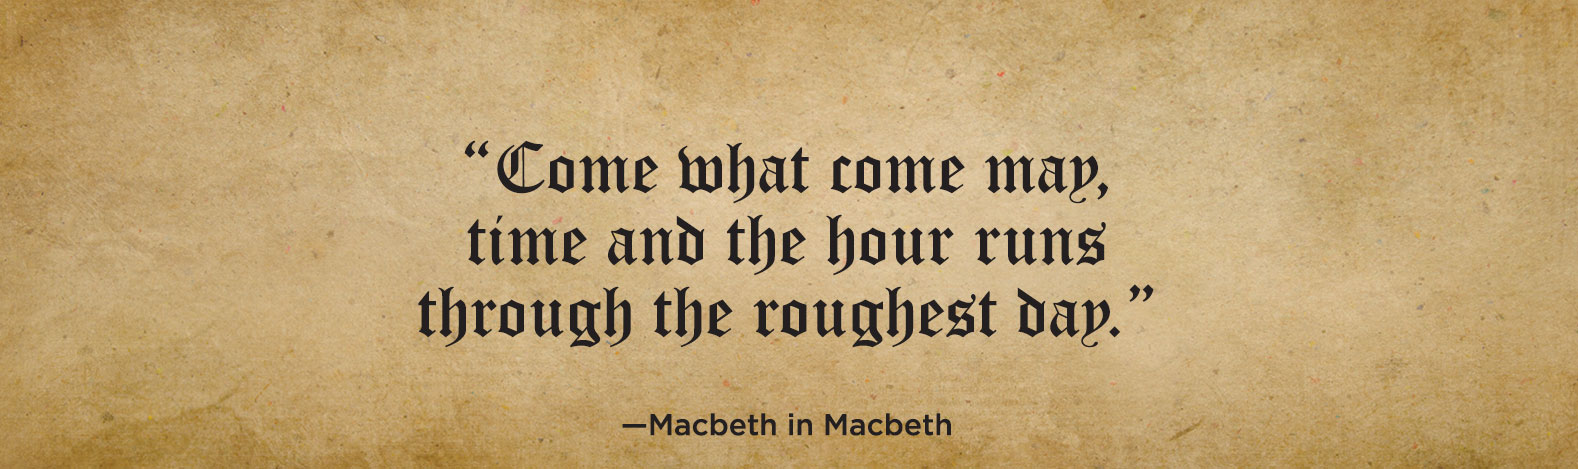 Macbeth-Then-Movers and Shakespeare—Shakespeare and Business.jpg